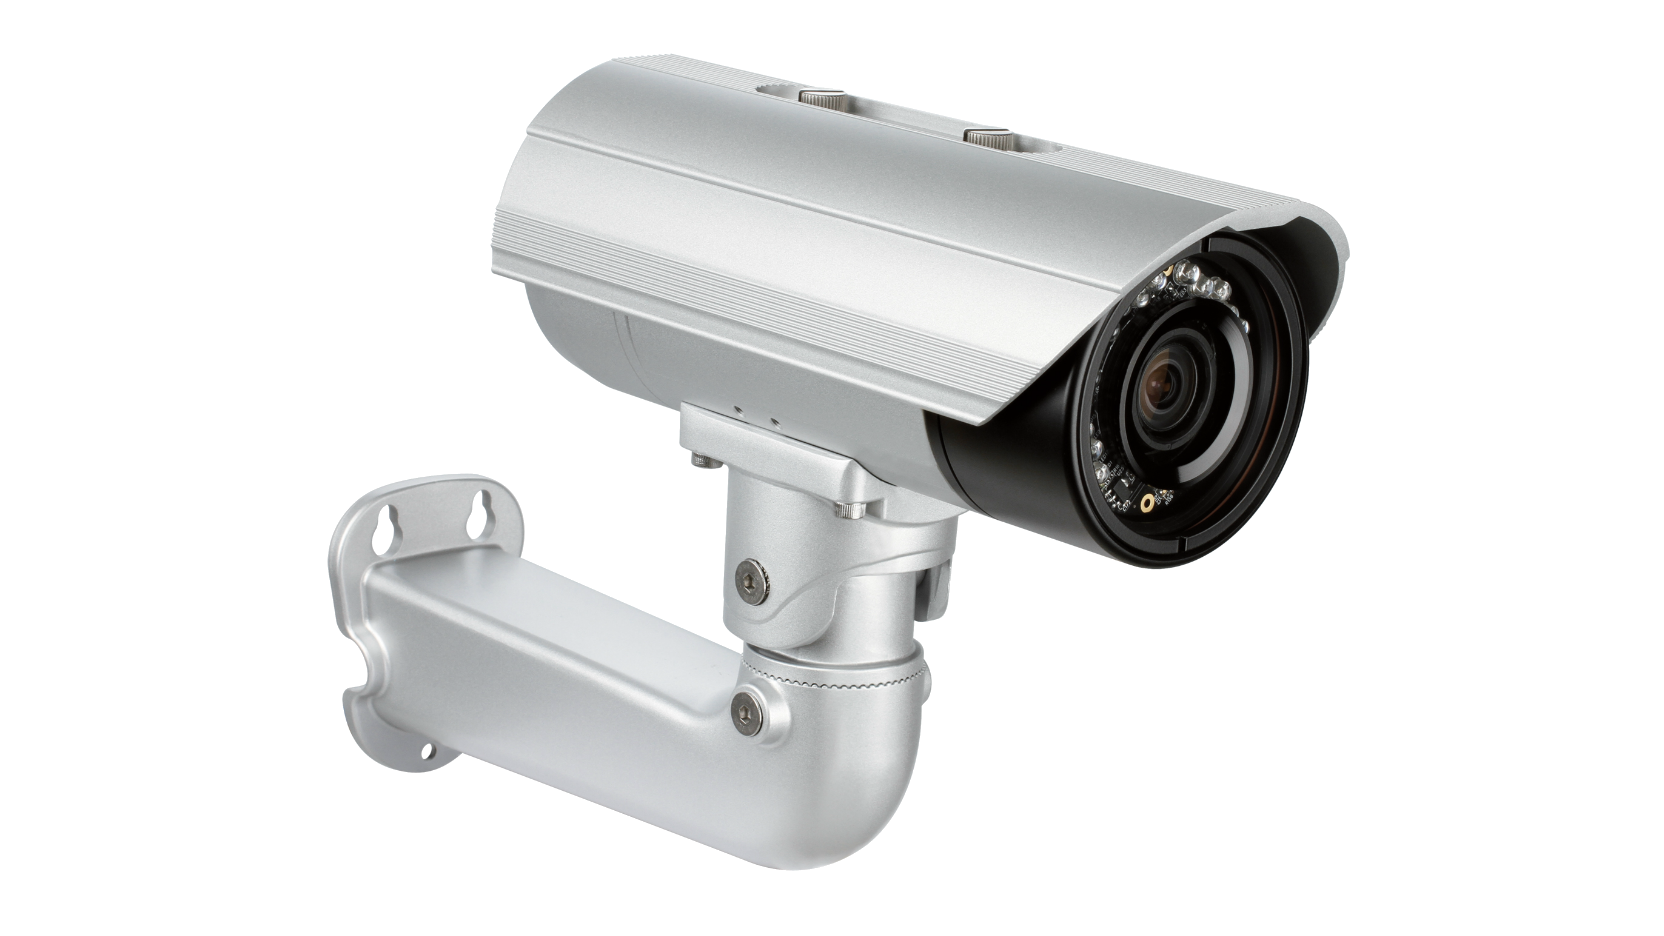 DCS-7010L - D-Link 4.3mm F/2.0 HD Mini Bullet Outdoor Network Surveillance Camera Day and Night